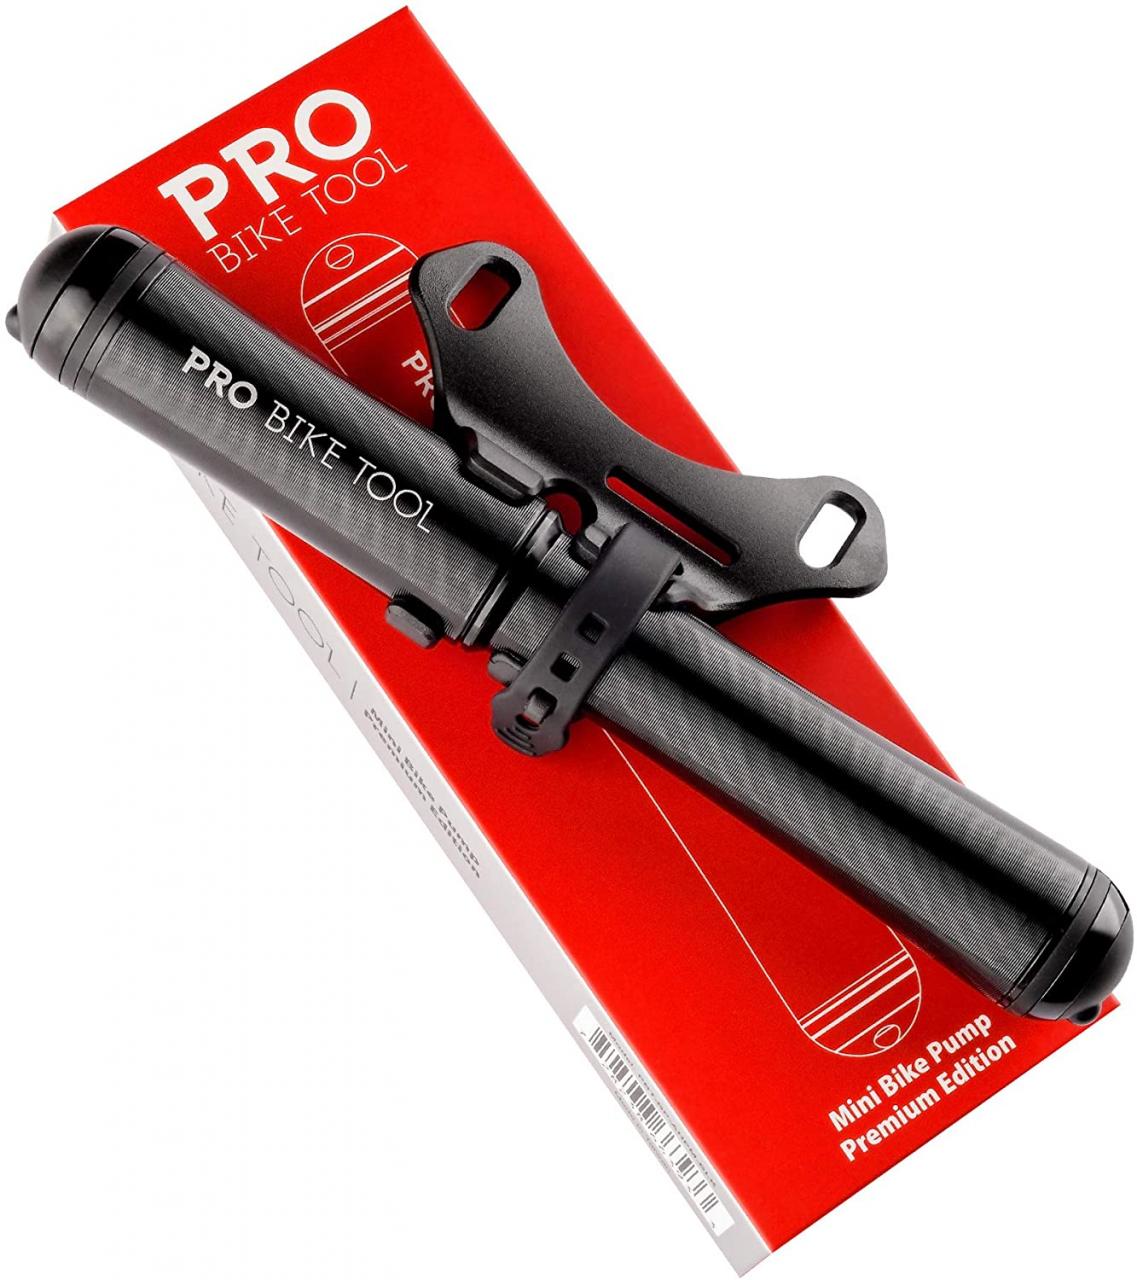 Buy PRO BIKE TOOL Mini Bike Pump Premium Edition - Fits Presta and Schrader  valves - High Pressure PSI - Bicycle Tire Pump for Road and Mountain Bikes  Online in Vietnam. B08HR4GBVG